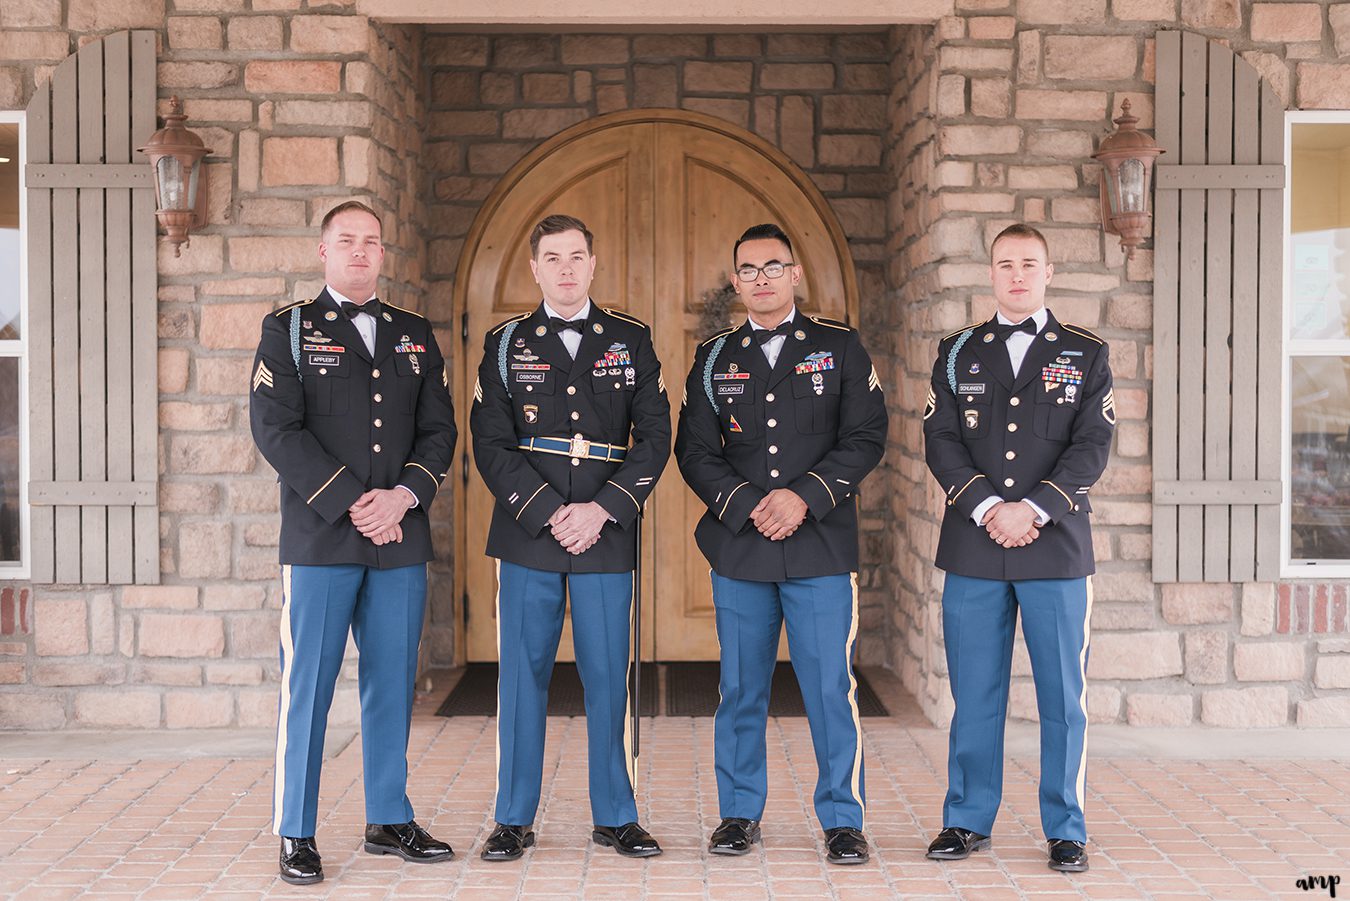 Groomsmen dressed in Army blues pose in front of the doorway of the vineyard at Two Rivers Winery